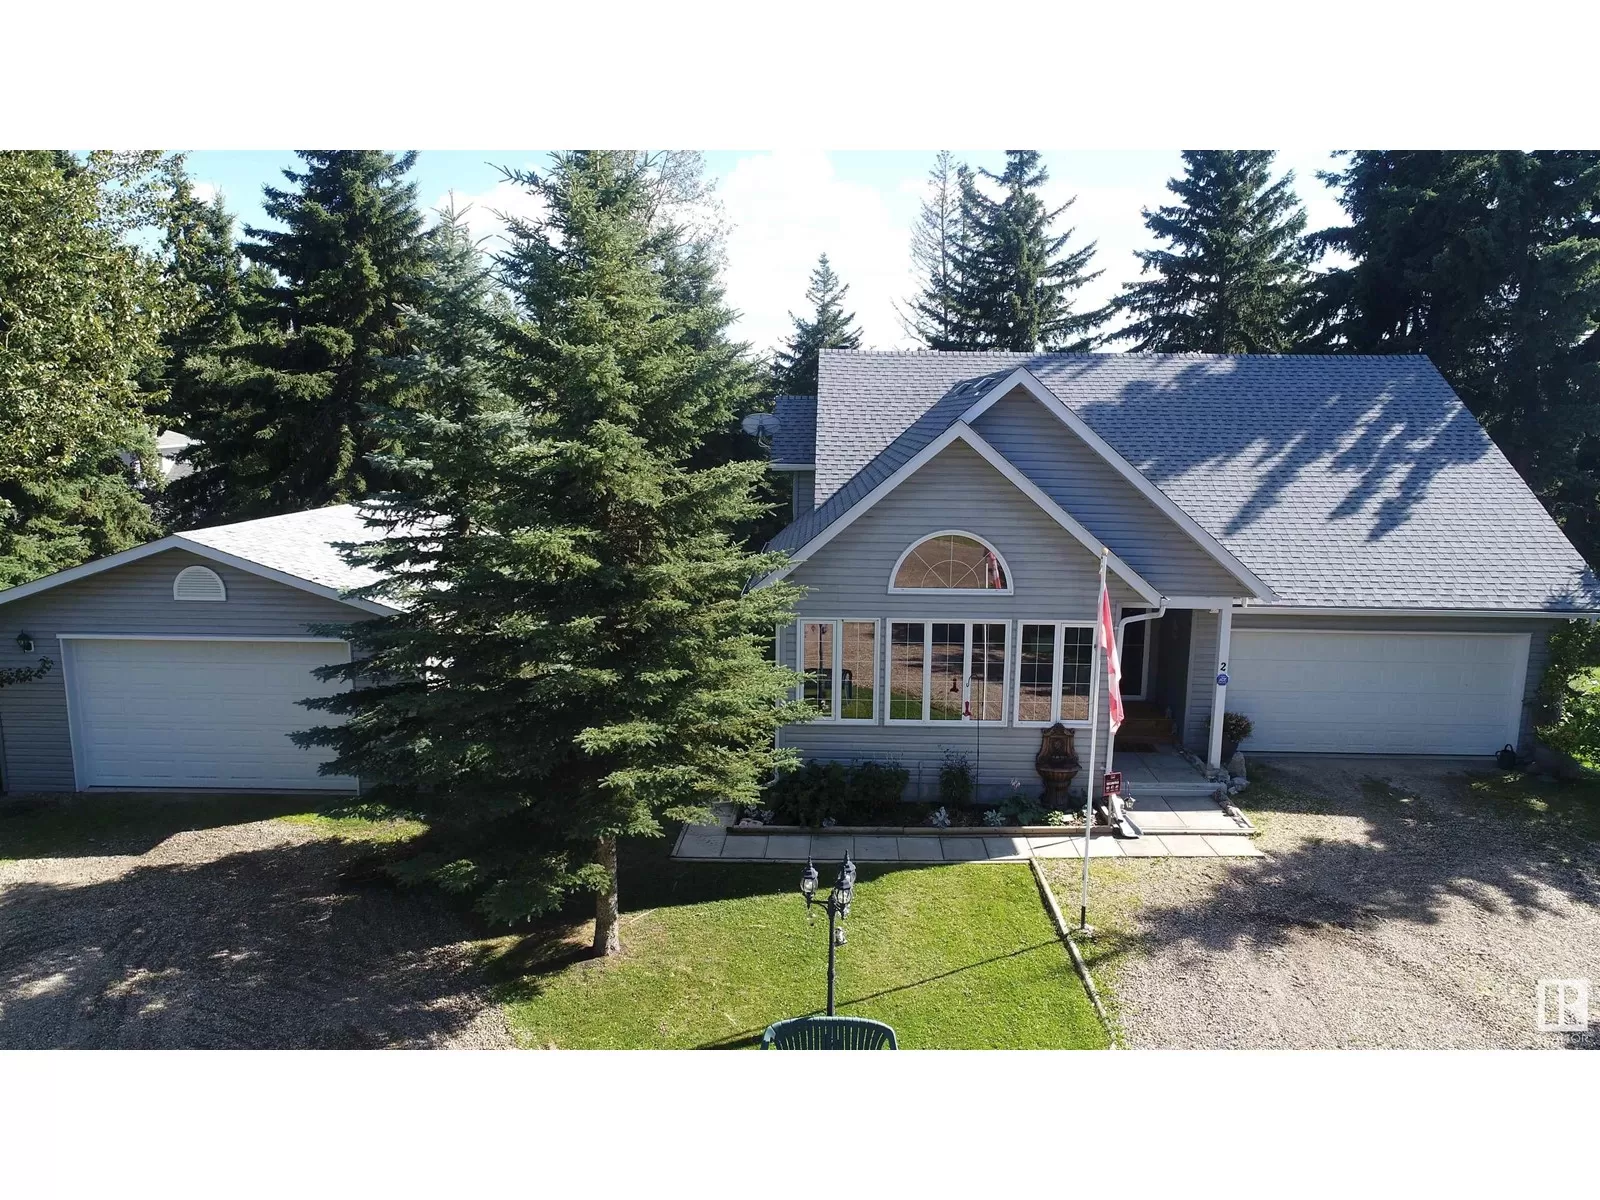 House for rent: 105 62036 Twp 462, Rural Wetaskiwin County, Alberta T0C 0T0